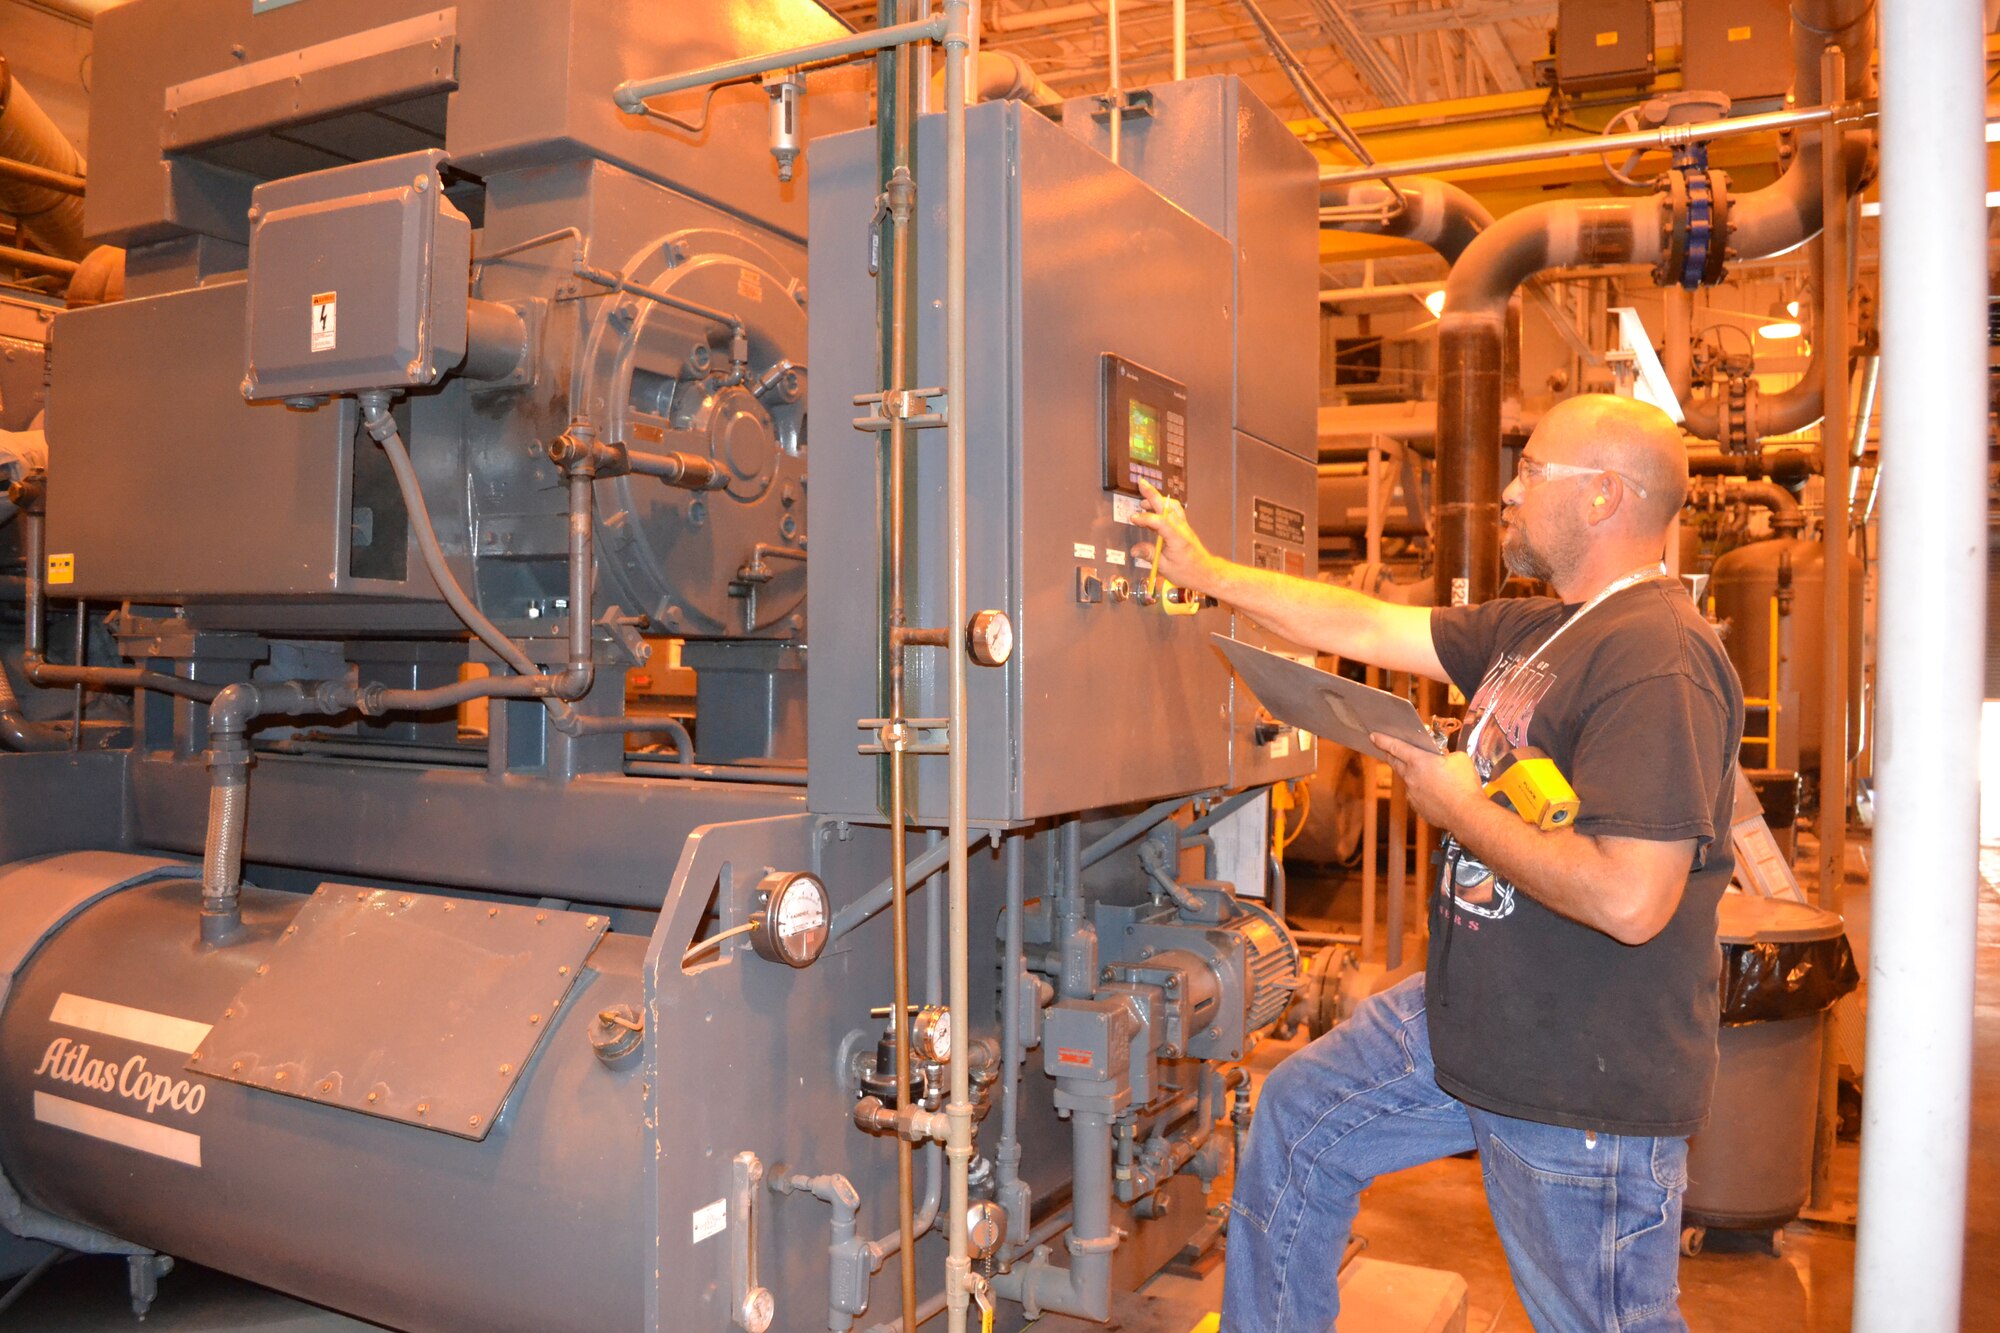 Patrick Duff, a production equipment mechanic with the 76th Maintenance Group, takes meter readings of the oil pressure and temperature, cooling water temperature and the output temperature on one of two 1,750 horsepower compressors.  Each compressor is capable of producing 4,500 cubic feet of air at 300 psi.  The shop also has a 3,000 horsepower compressor that produces 9,000 cubic feet of air at 300 psi. Through improved communication with production and closely monitoring air compressors, electric consumption is down 29% from three years ago.  Cost avoidance for the three years is over $800,000. (Air Force photo by Ron Mullan/Released)